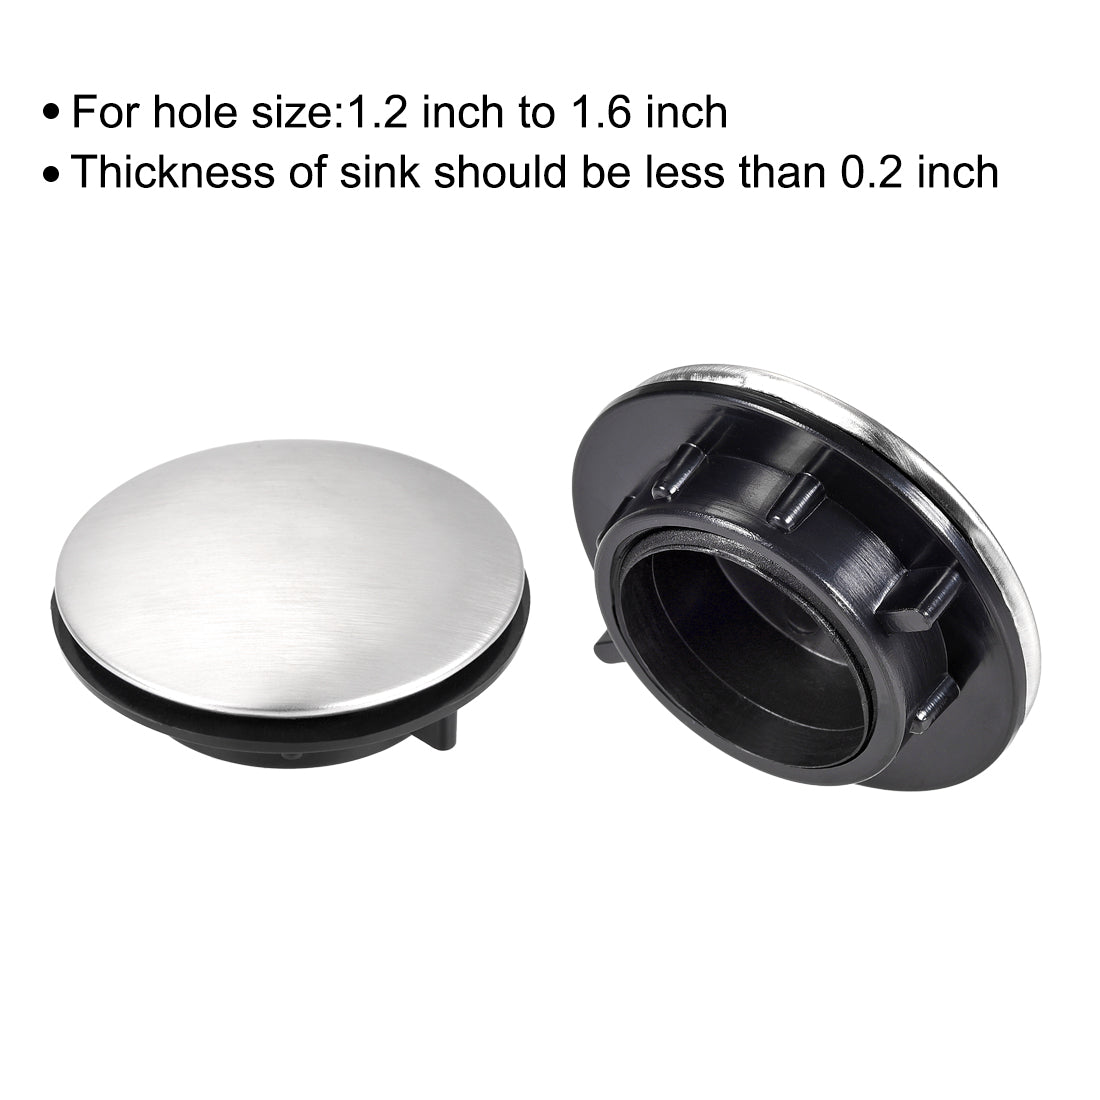 uxcell Uxcell Faucet Hole Cover for Dia 1.2 to 1.6 Inch, Kitchen Sink Tap Hole Cover, 3 Pcs